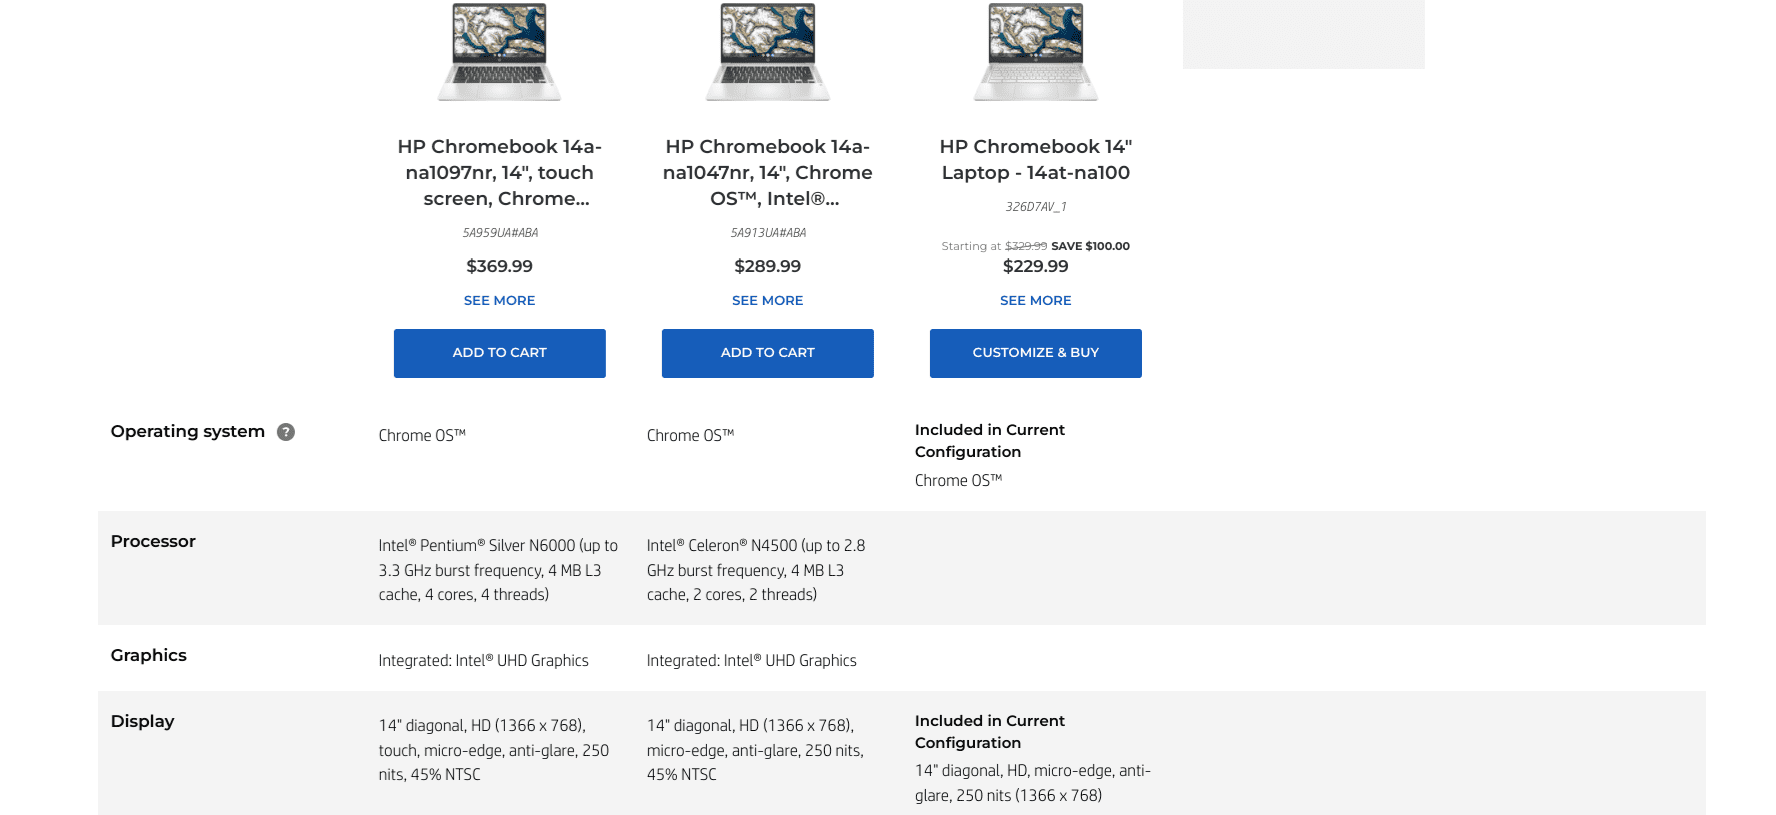 Price comparison of the different HP Chromebook 14a models